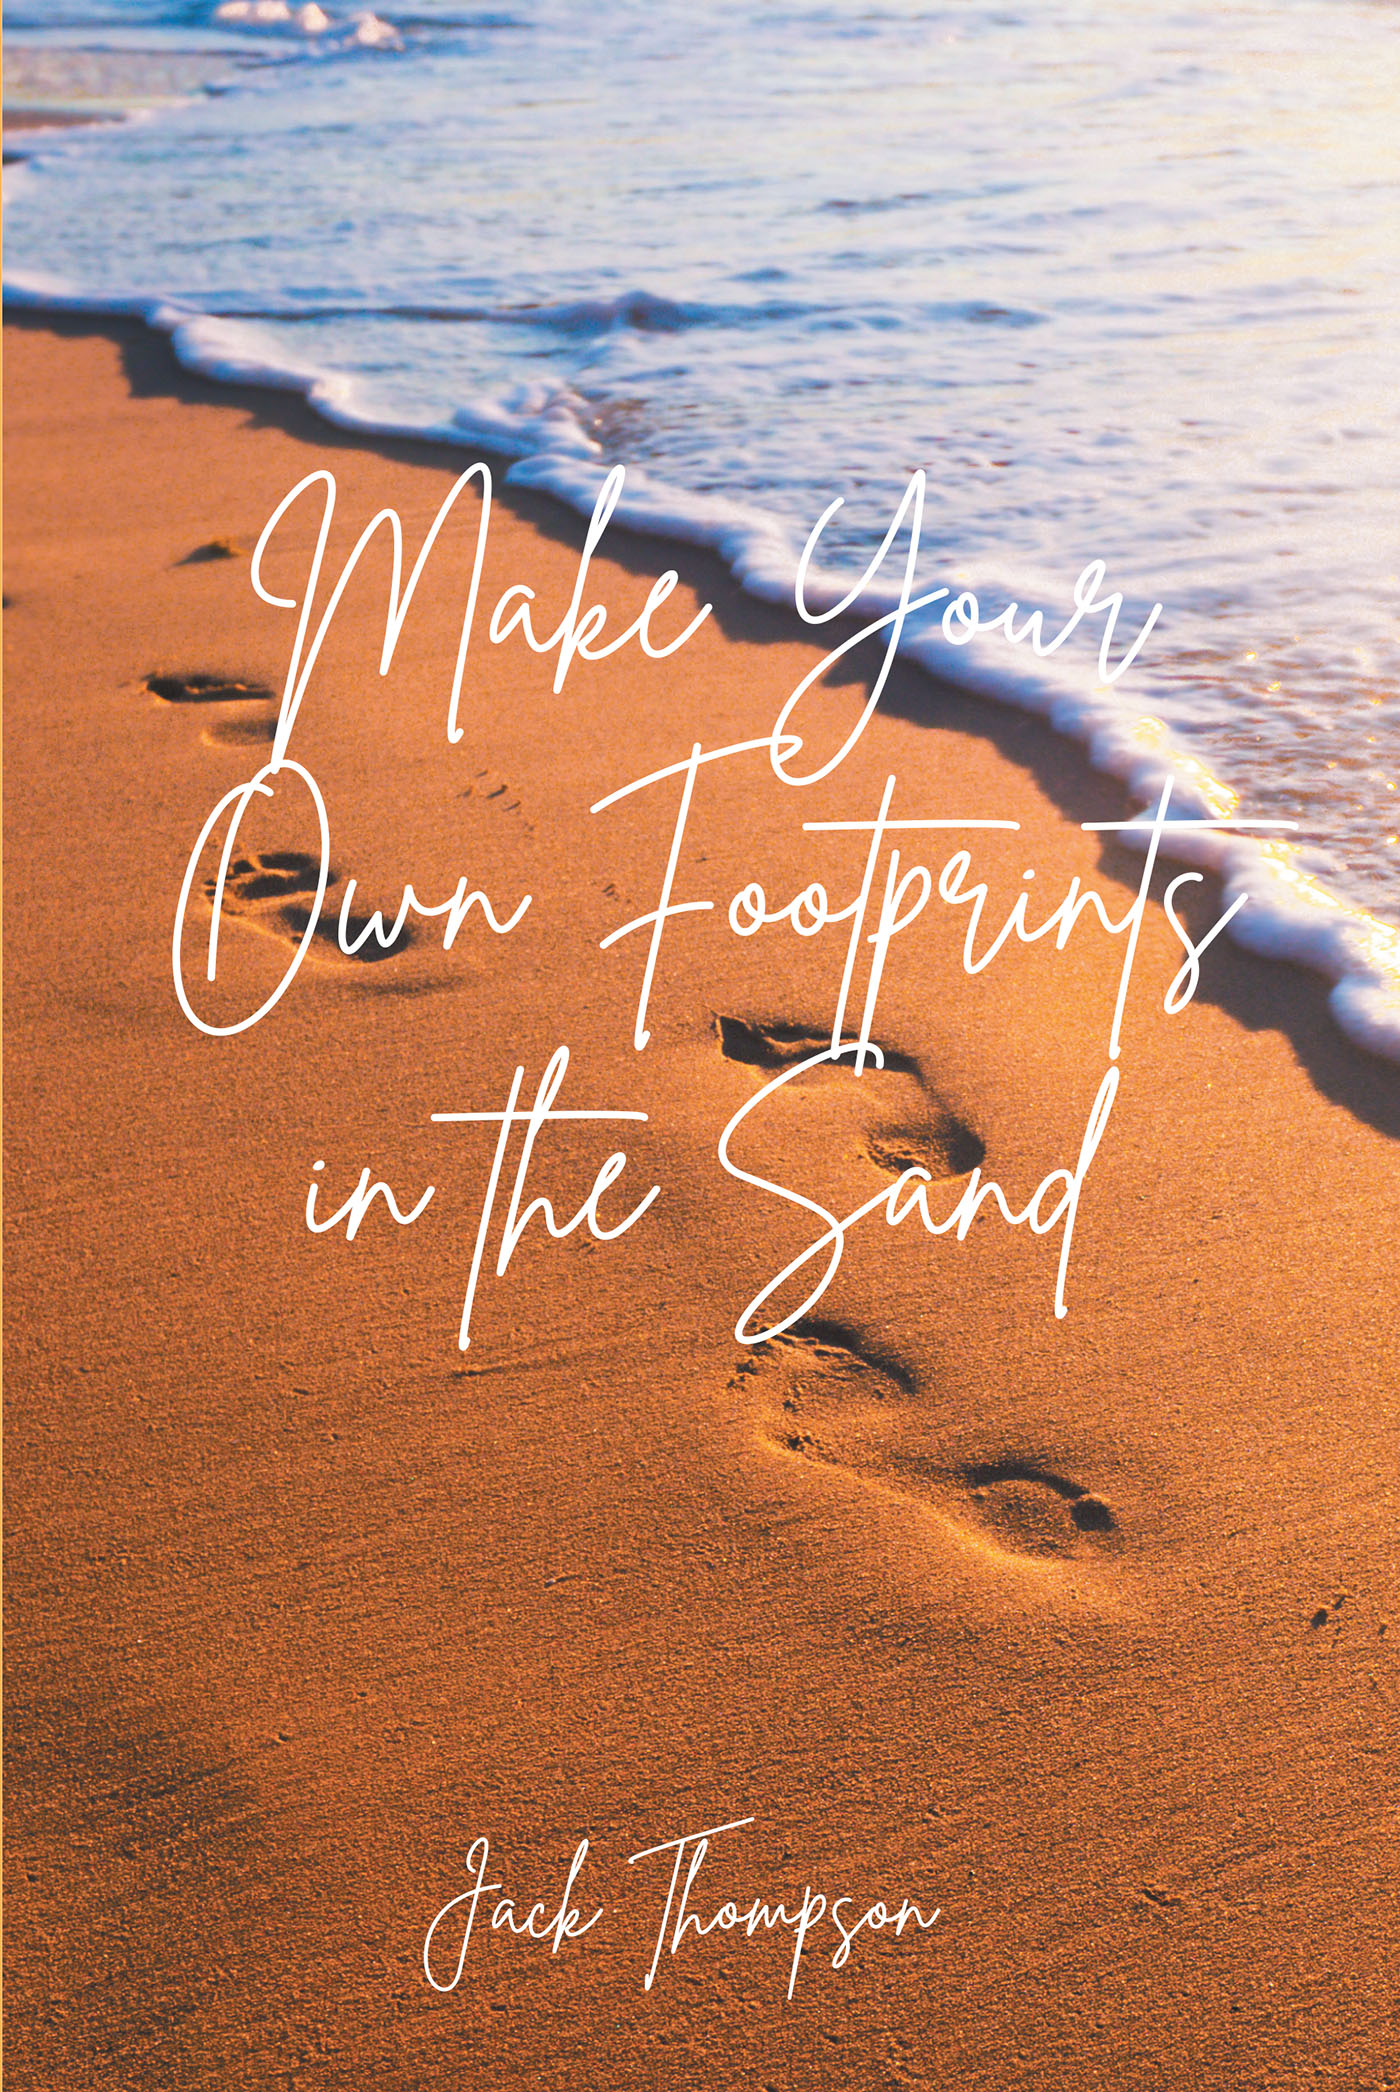 Author Jack Thompson’s Newly Released "Make Your Own Footprints in the Sand" is a Series of Poems That Will Uplift One's Faith and Carry Readers Through Life’s Trials